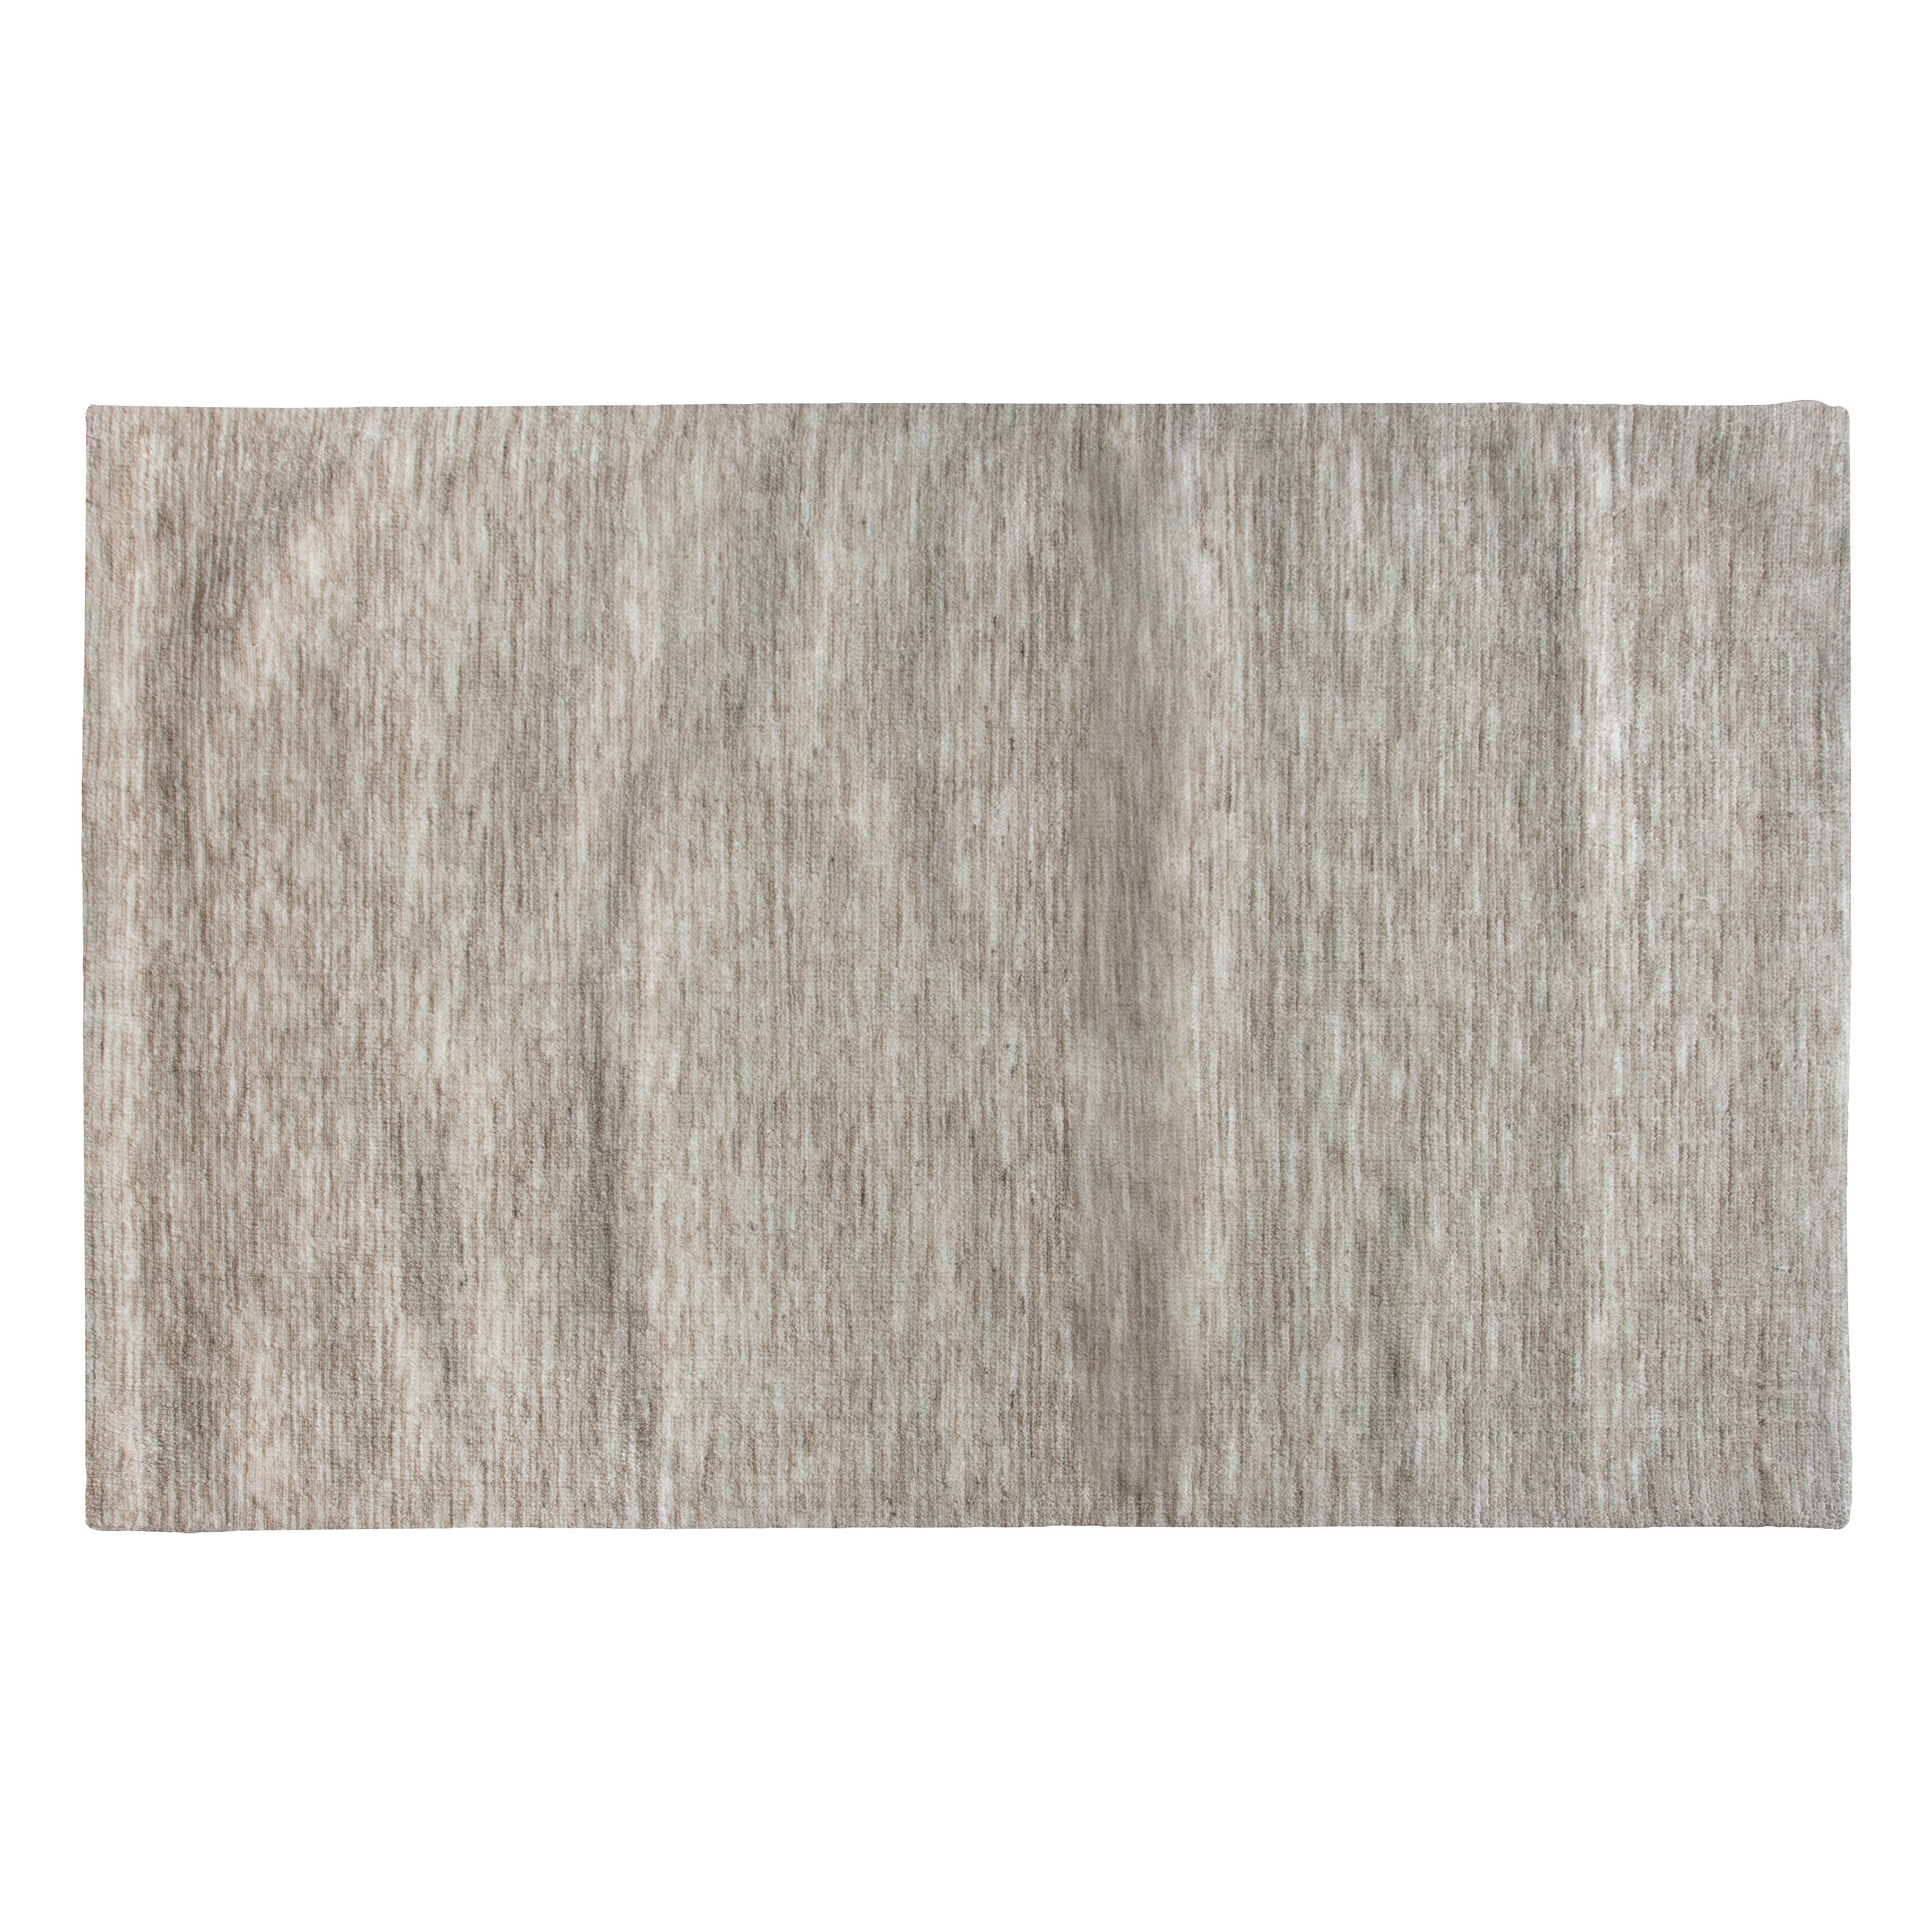 Trivago Rug Taupe 800x1500mm